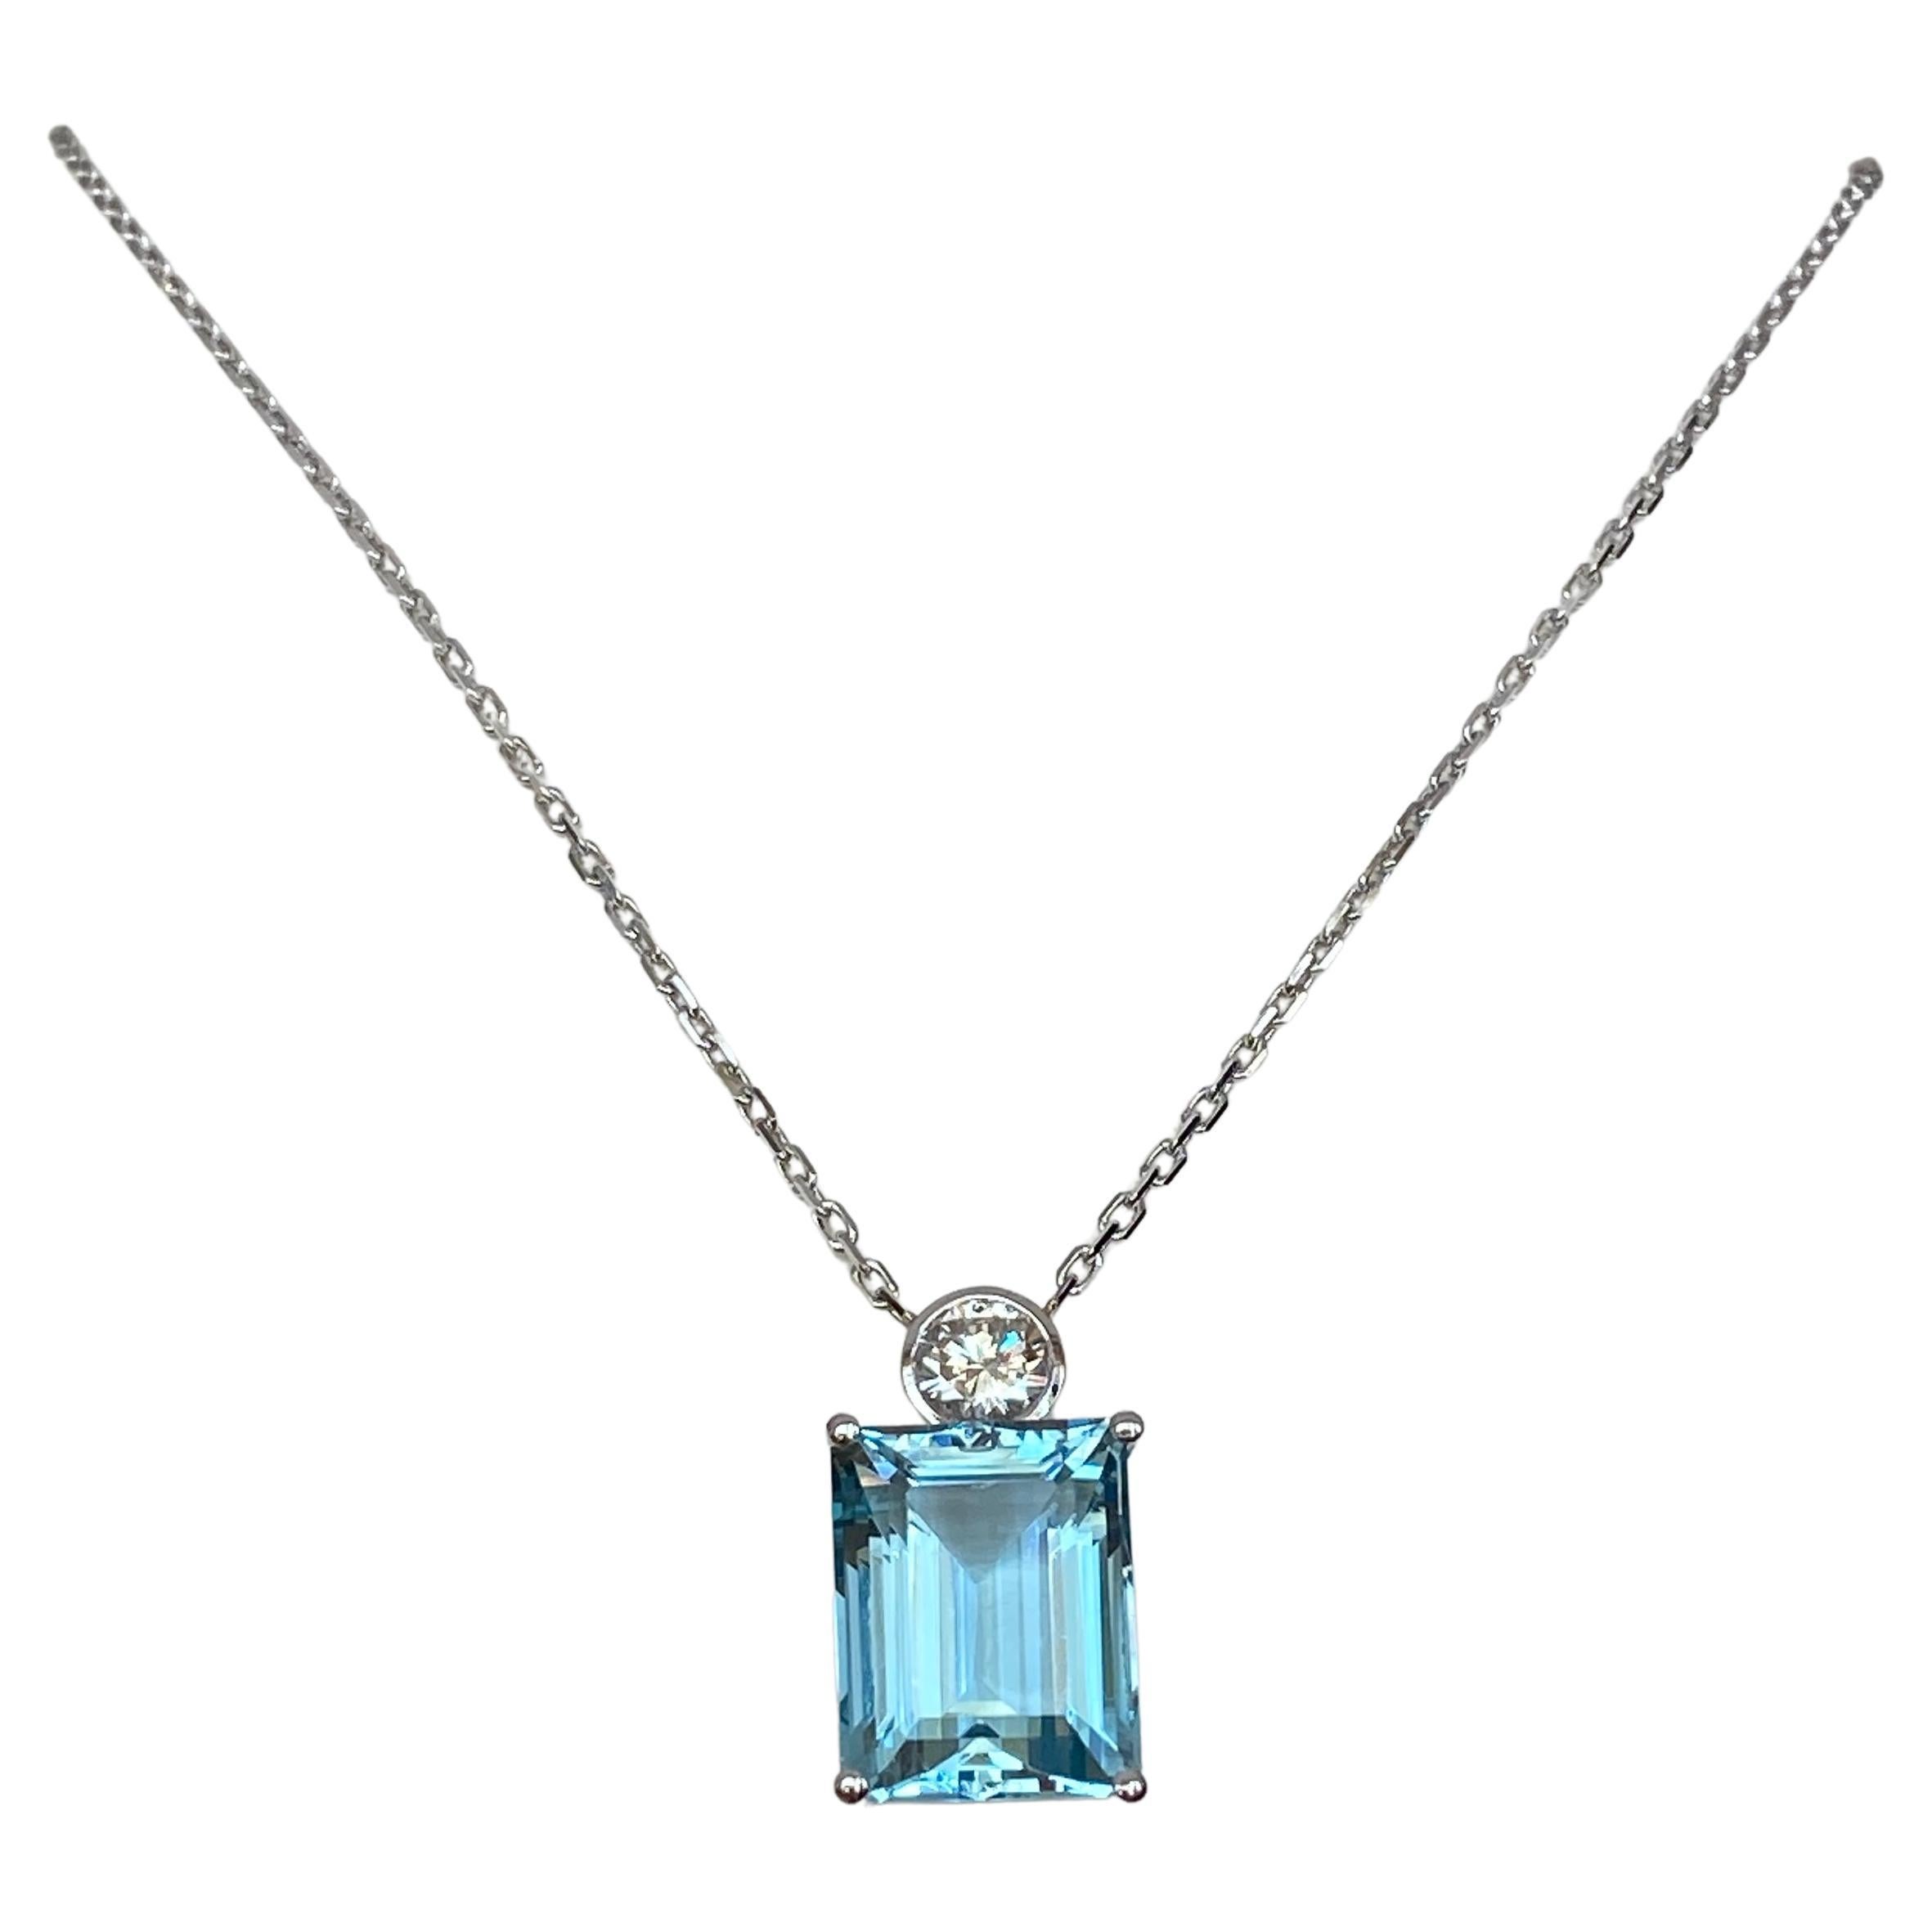 18 Karat White Gold Necklace with a Diamond Pendant Decorated with Aquamarine 